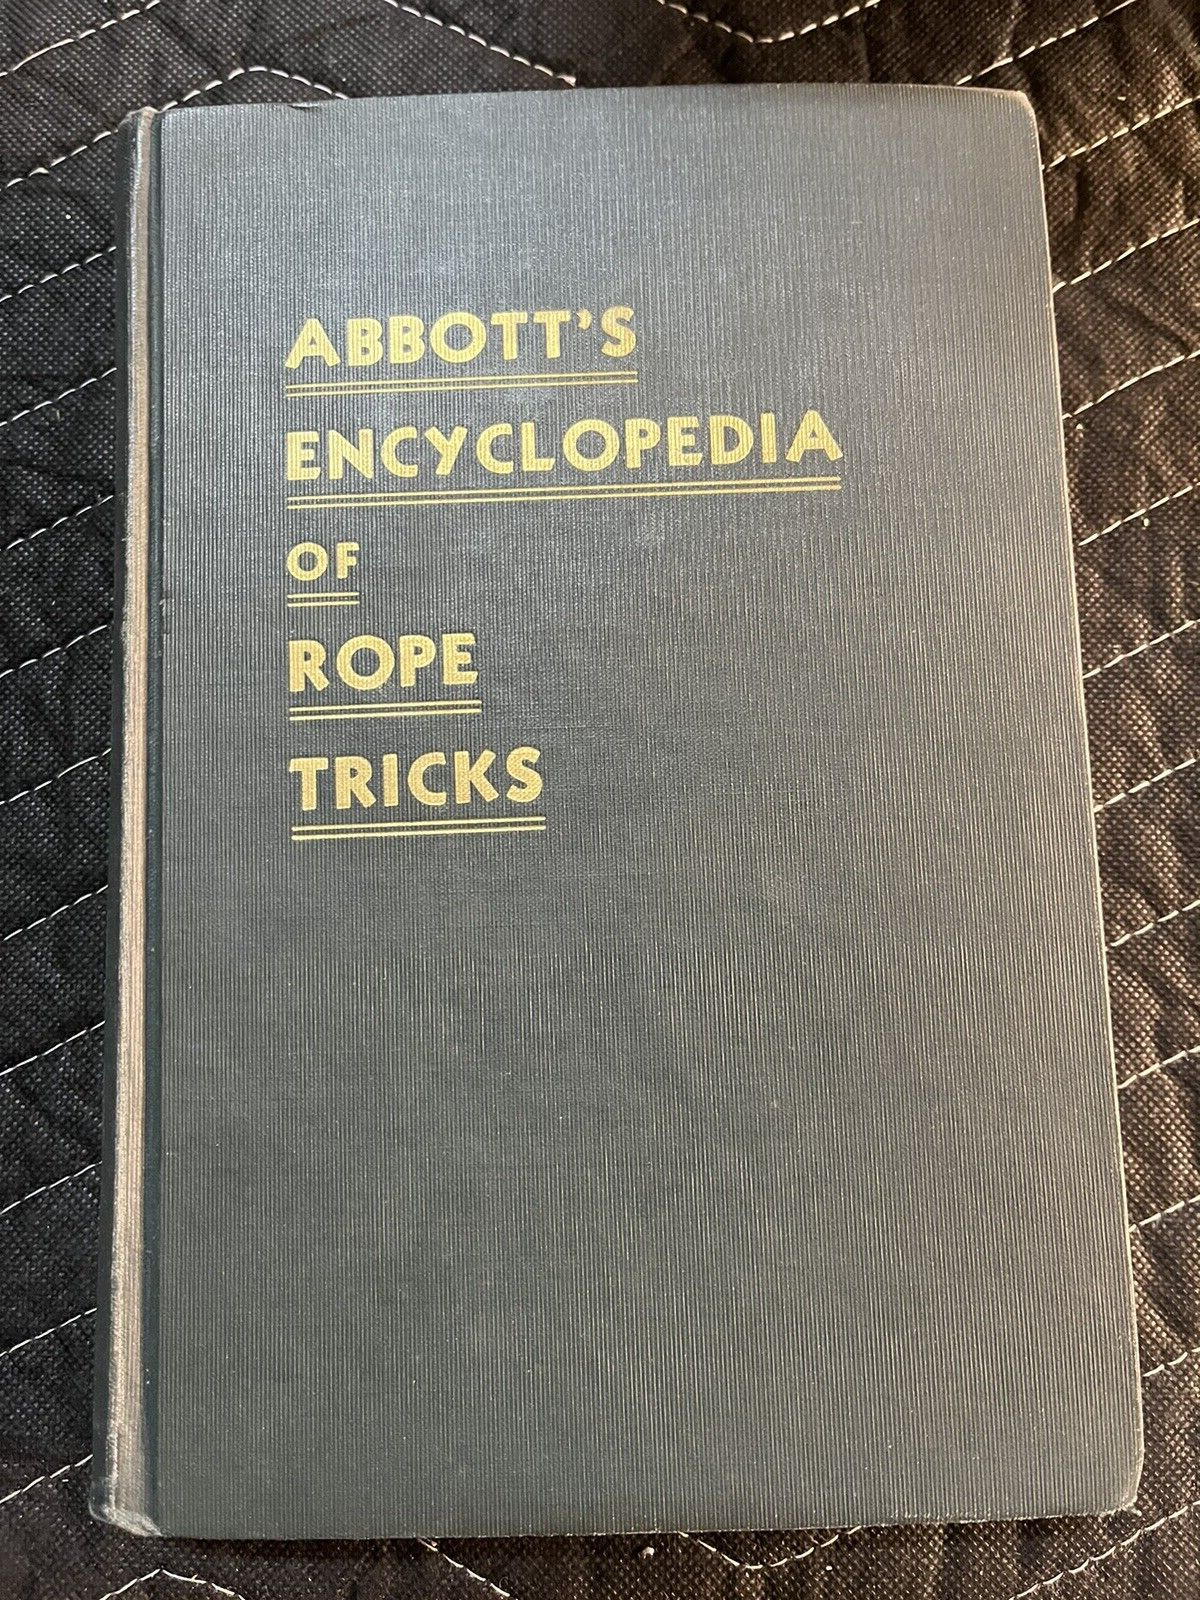 ABBOTT\'S ENCYCLOPEDIA OF ROPE TRICKS Volume 1, hard bound, 400 pages